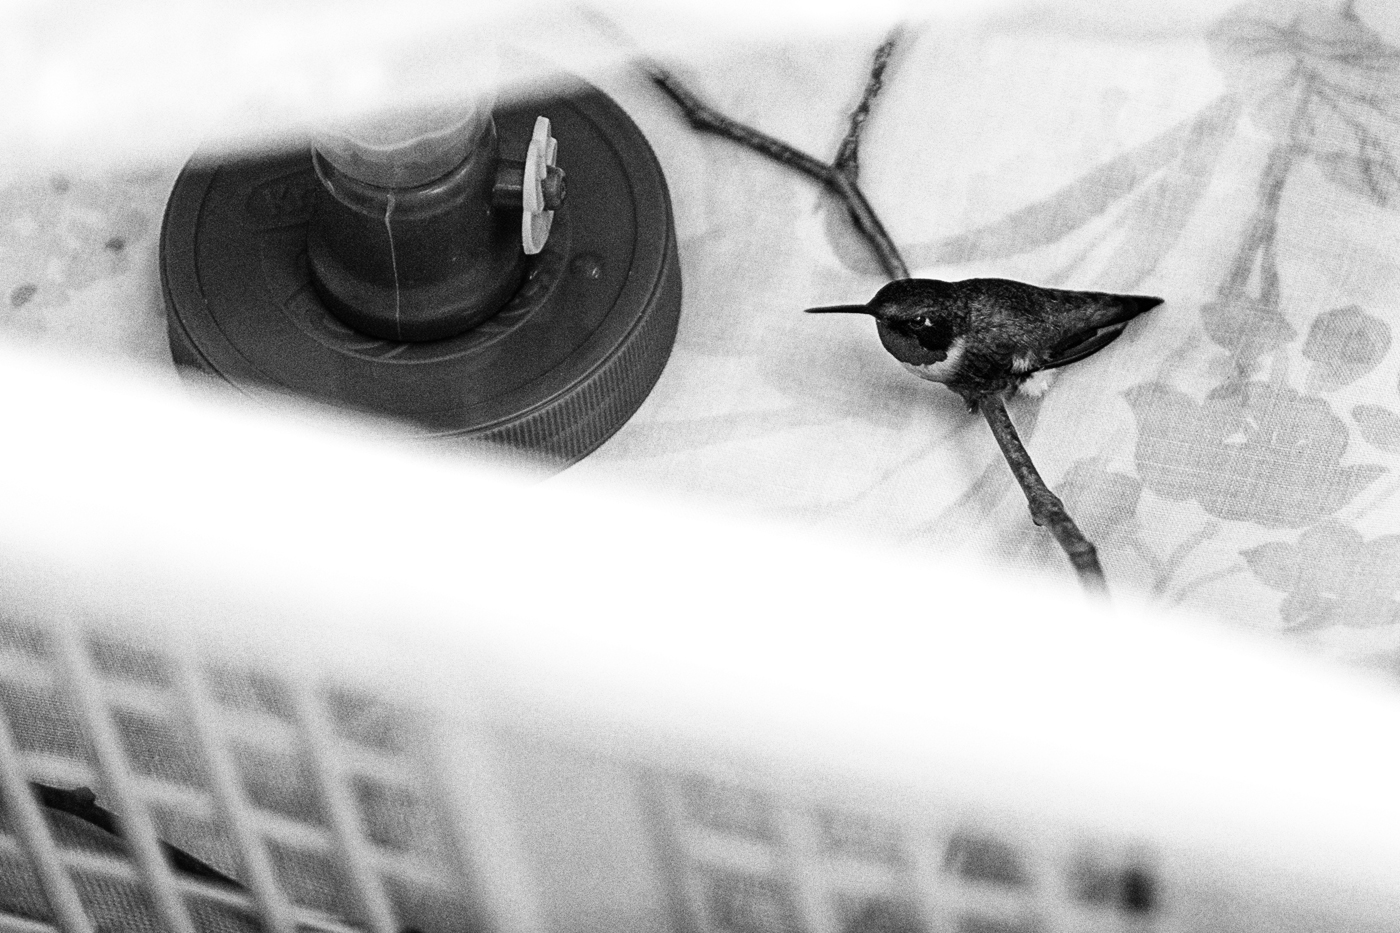 A humming bird in a crate.